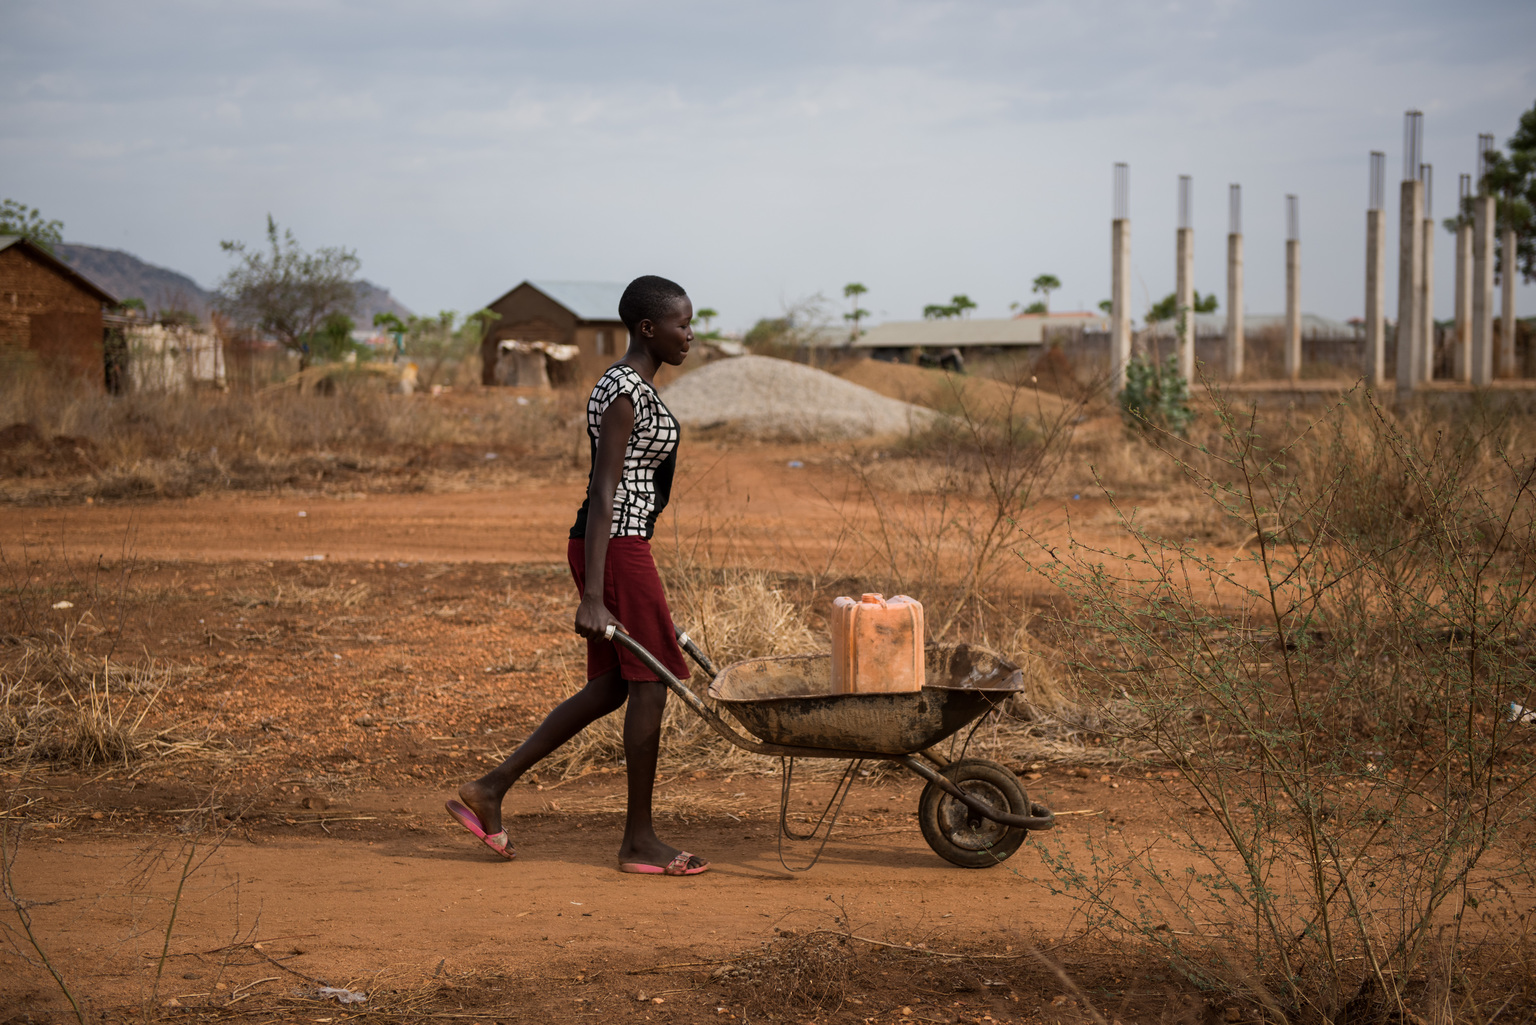 Seventeen-year-old Amal pushes a wheelbarrow with a jerry can of untreated water from a tap on the outskirts of Juba, South Sudan, Friday 17 March 2017. “I don’t have to walk to the river any more, which means I have more time to study, but the water is still dirty, and I worry about my younger siblings getting sick when they drink it” says Amal, who fetches water every day. A worsening water crisis, fuelled in part by conflict and a deteriorating economy, is just one more challenge families in Juba face on a daily basis. In 2015, an estimated 13 percent of residents had access to municipal water, supplied mainly through a small piped network and boreholes – but this number is likely to have dropped following the violence that hit the city in 2016. For those without municipal access, water is mostly provided through private sector water trucking. Because they draw untreated water straight from the White Nile river, UNICEF, in coordination with the Juba city council, has been providing the trucks with chlorine to treat the water and reduce the spread of deadly waterborne diseases. There are more than 2,000 water tankers in the city, but as running costs continue to rise, so to does the price of water for customers. The lack of safe water means those living in the capital are at huge risk to the spread of deadly waterborne diseases, with children especially vulnerable, exacerbating a growing nutrition crisis. A cholera outbreak which started in Juba in July 2016 has already killed 83 people and infected almost 4,500 others. Many of those who have been affected live in poor neighbourhoods, with little access to safe water and sanitation facilities.